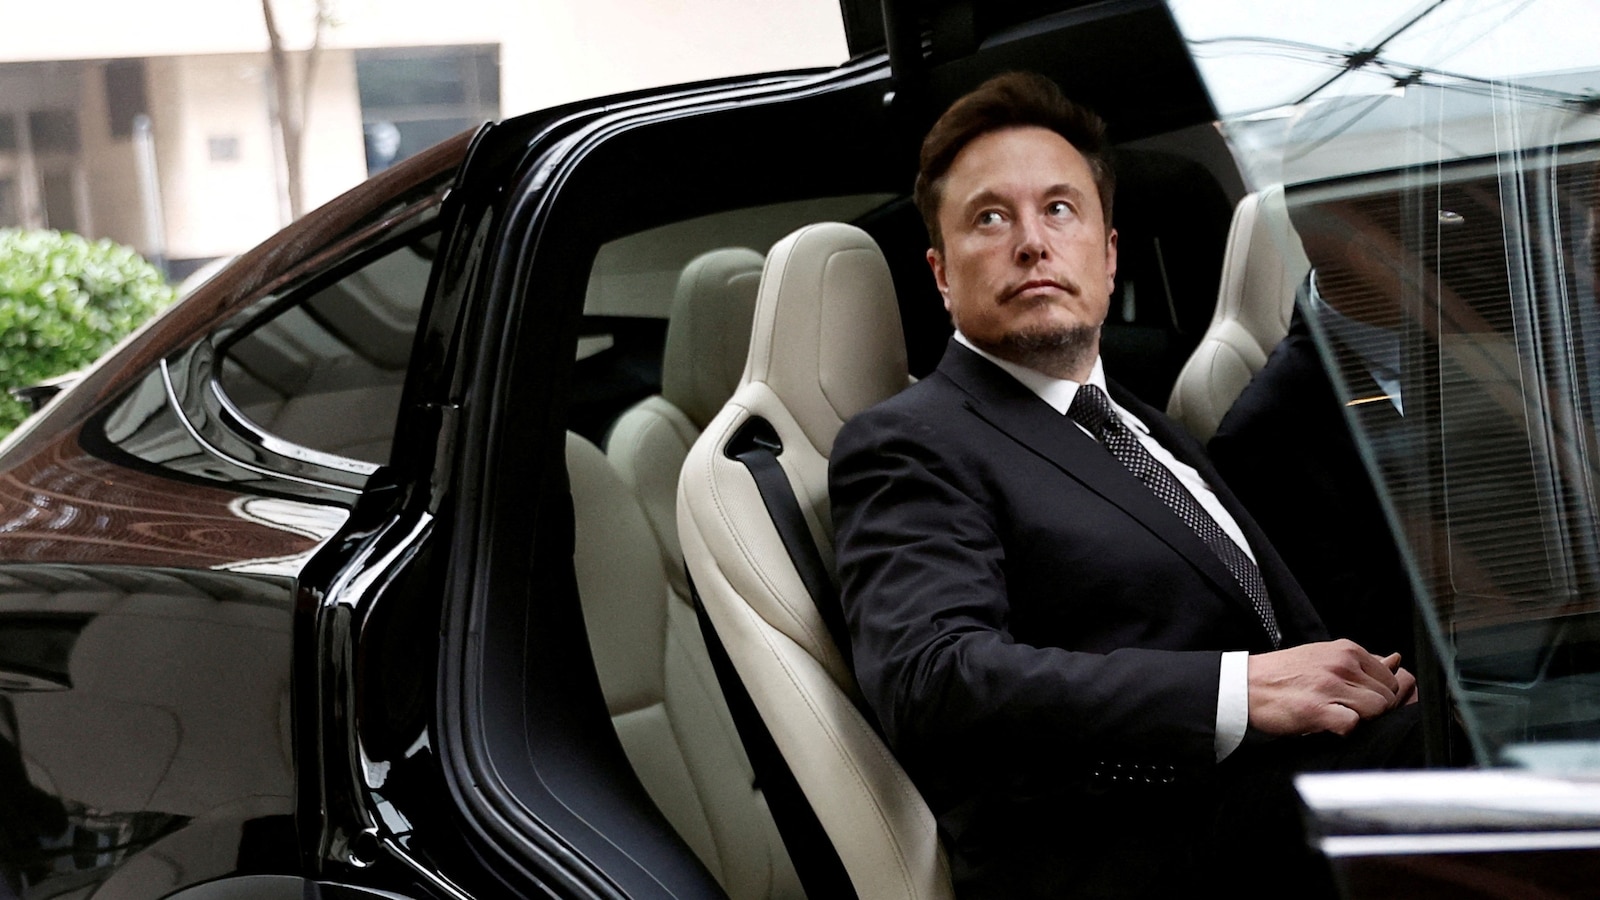 Tesla stock has plummeted this year. Will the company recover? [Video]